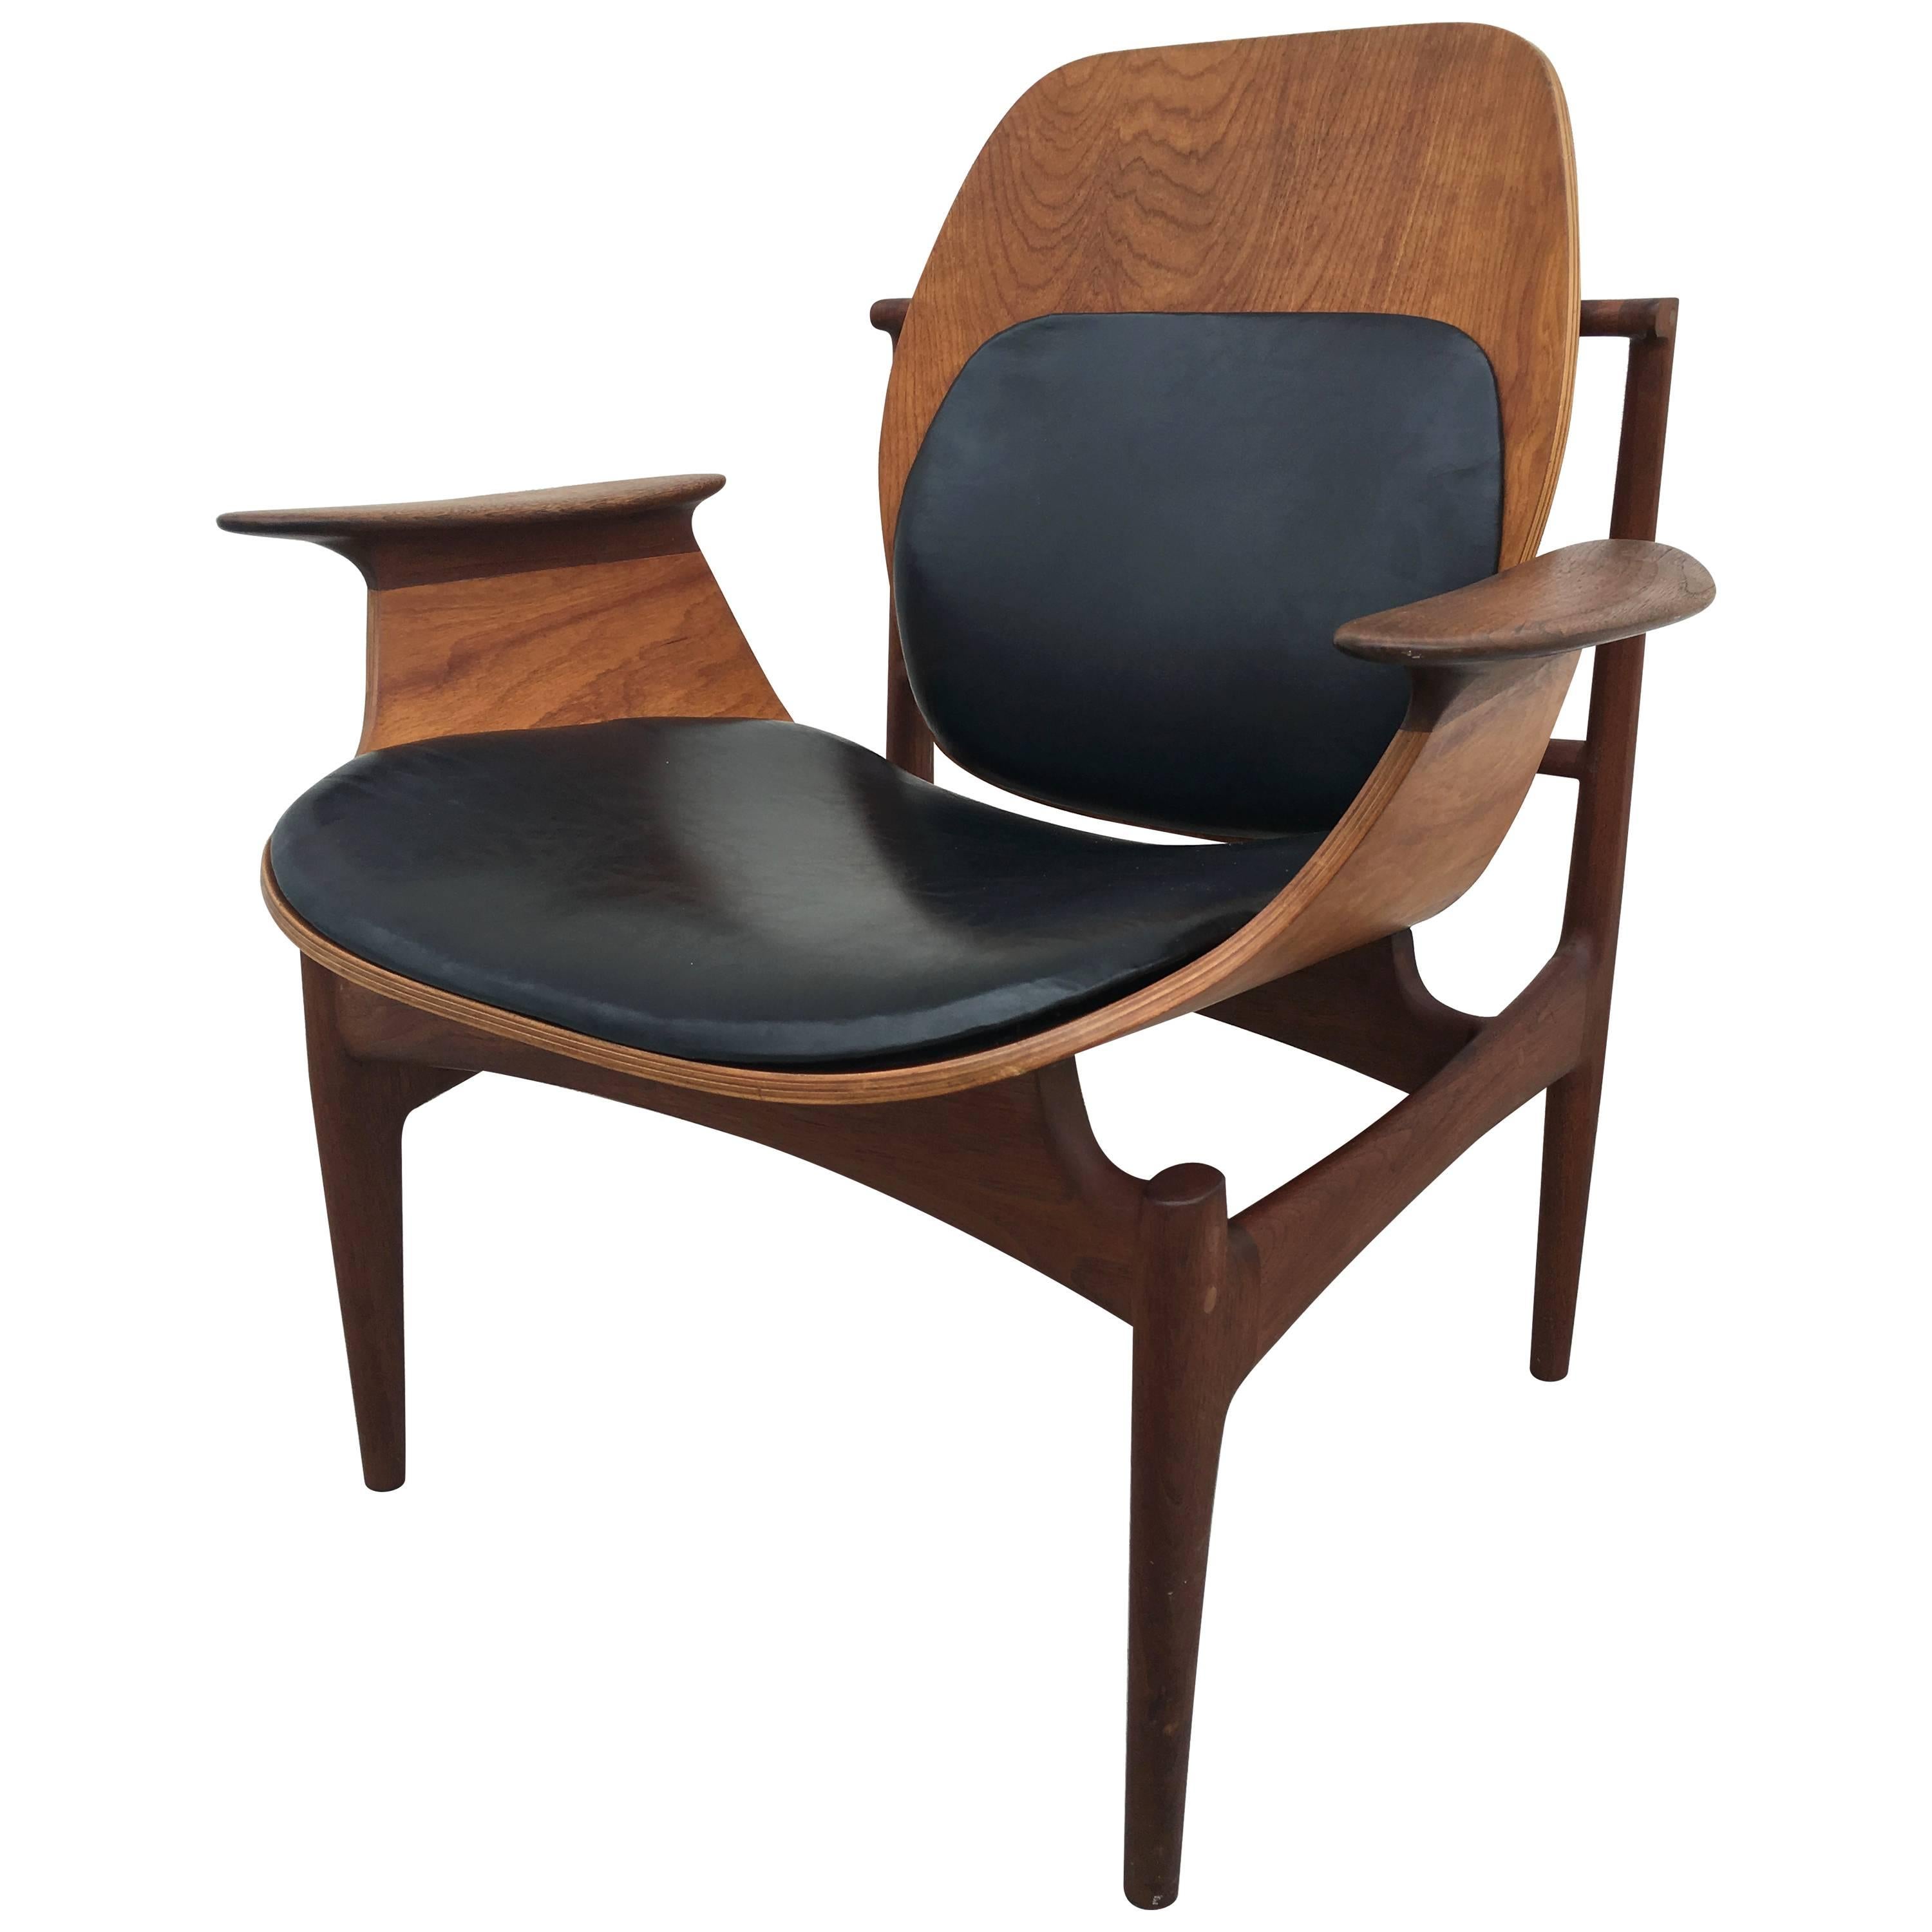 Stunning One off 1/1 Studio Chair by John McWilliams, California, circa 1960s For Sale